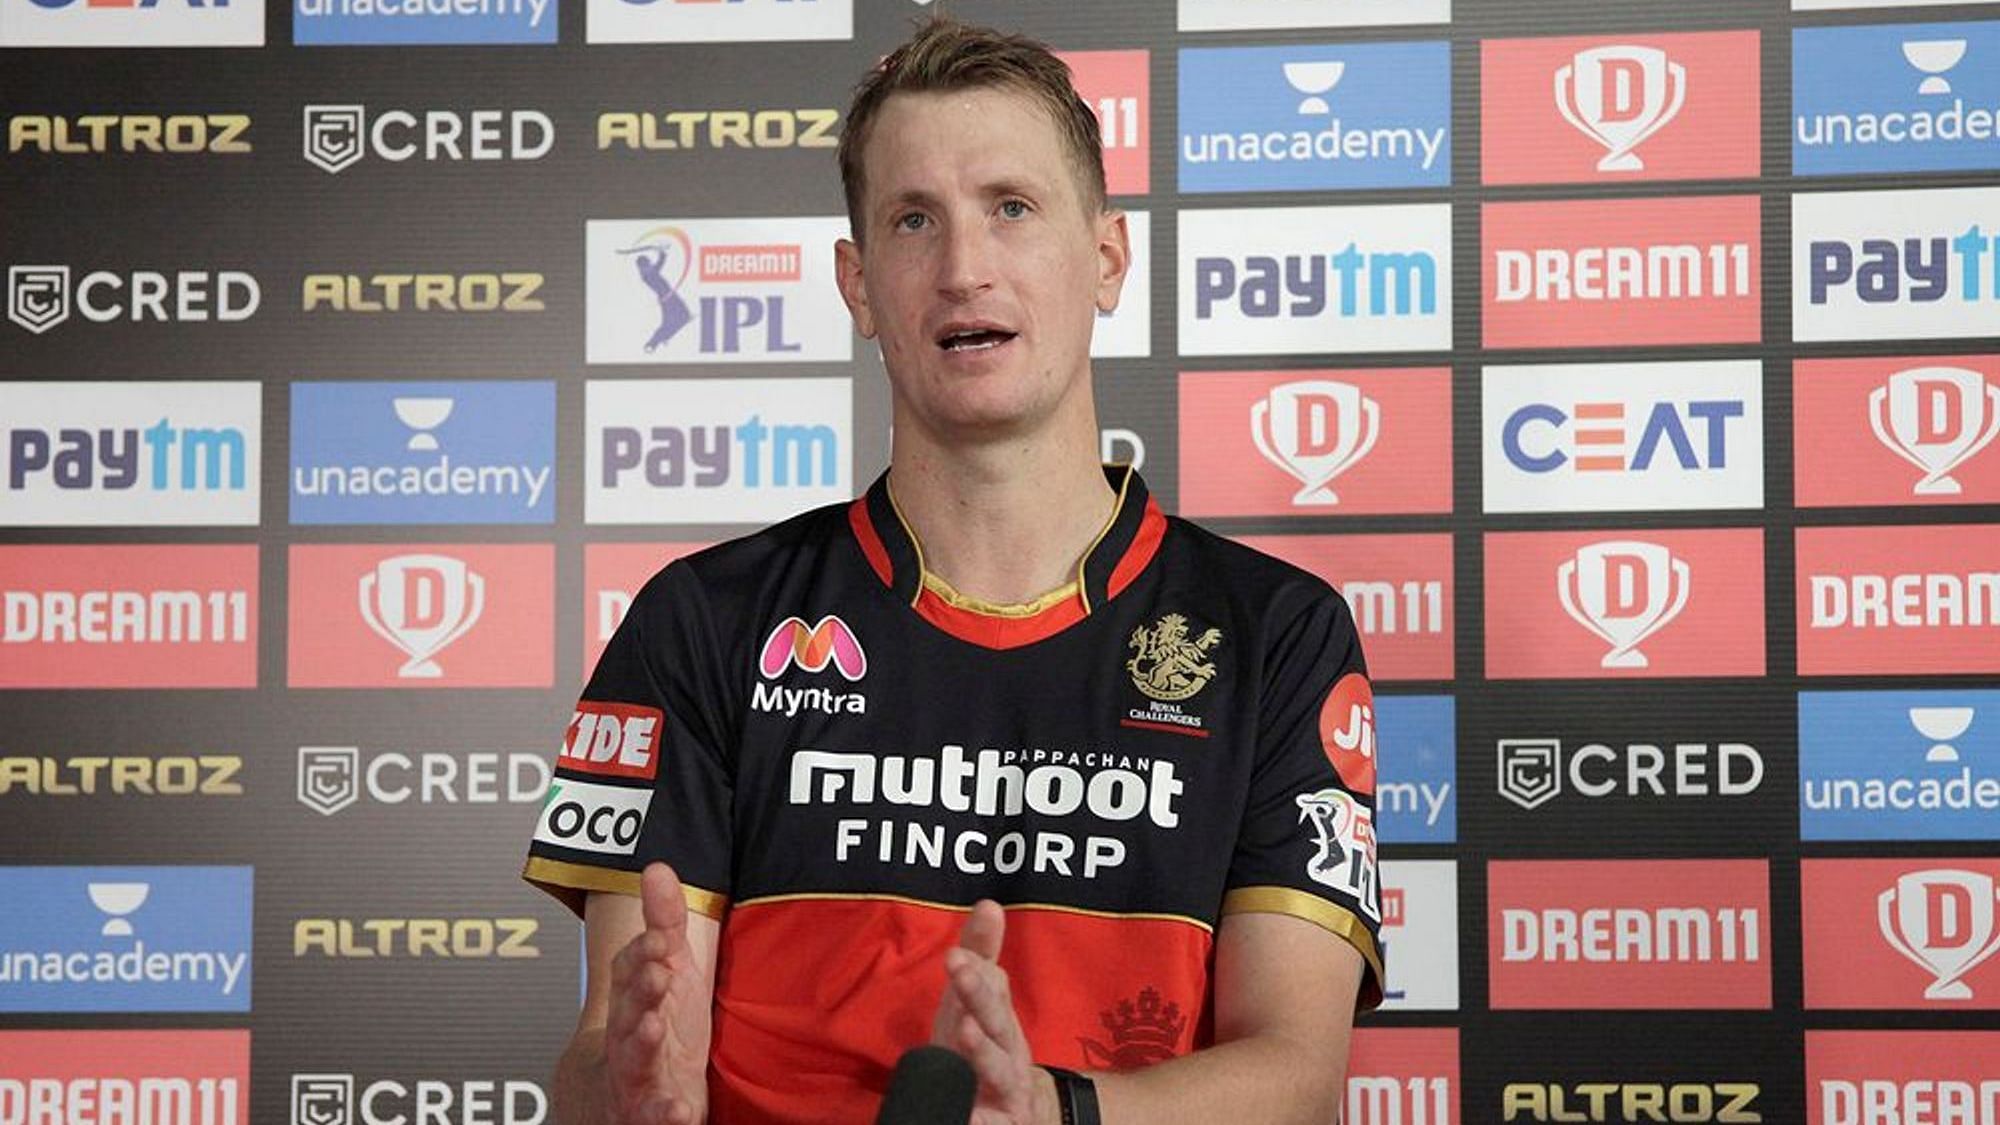 Chris Morris hit 25* runs off 8 balls to take Royal Challengers Bangalore to 171, which he thought was enough